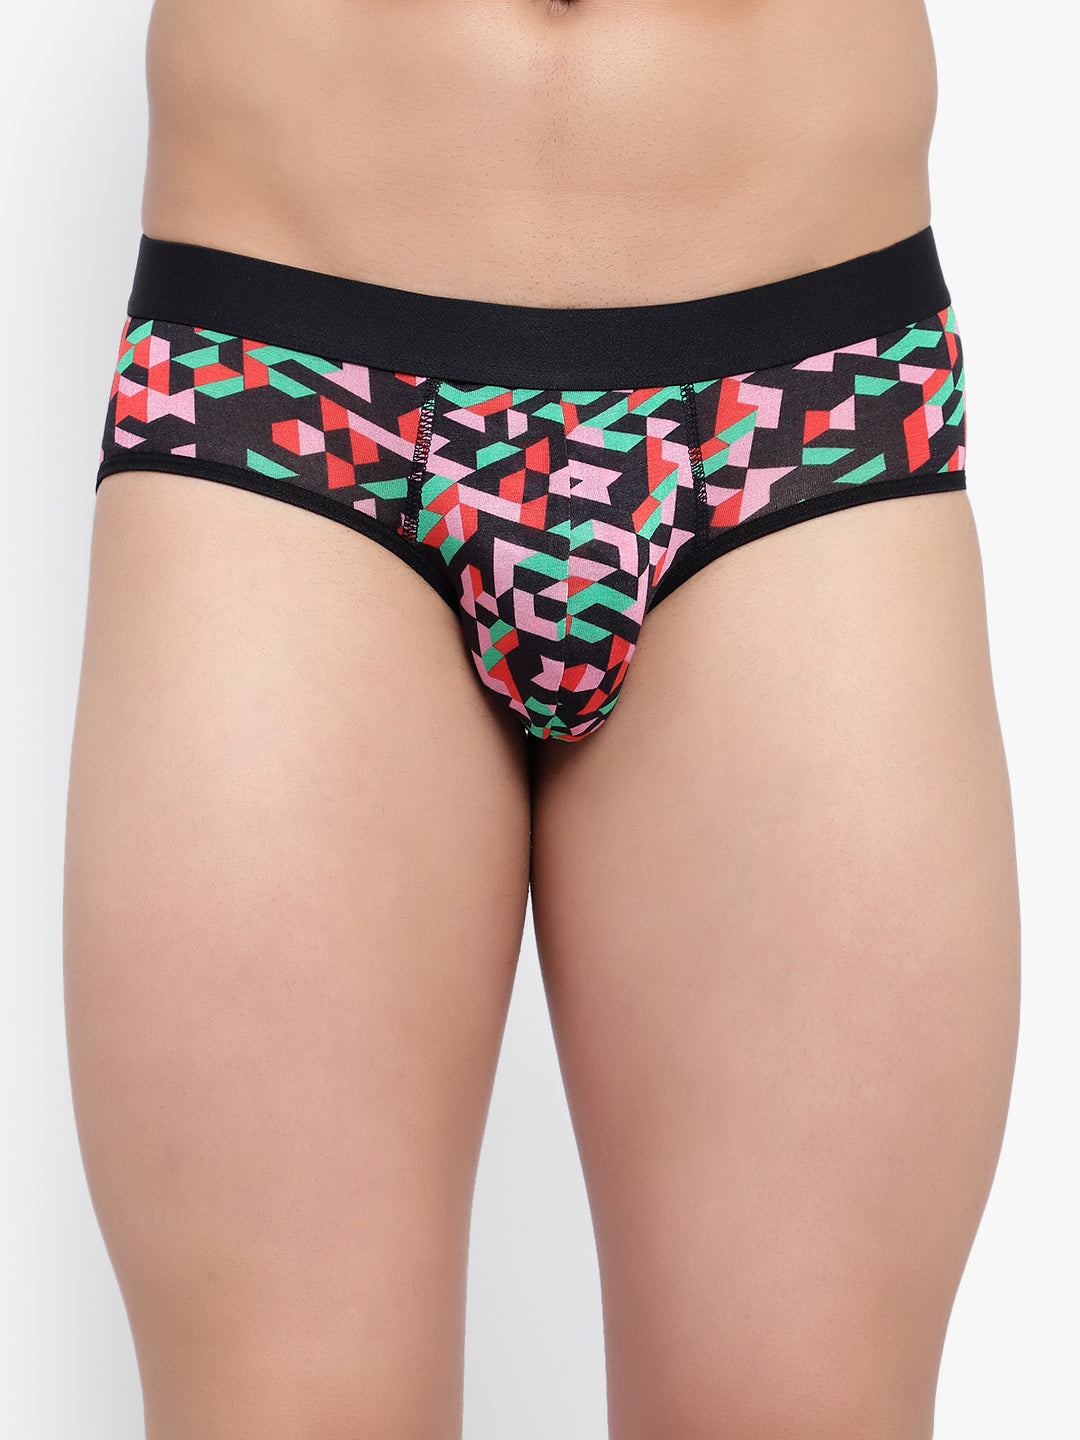 Buy CP BRO Printed Briefs with Exposed Waistband Value - Black